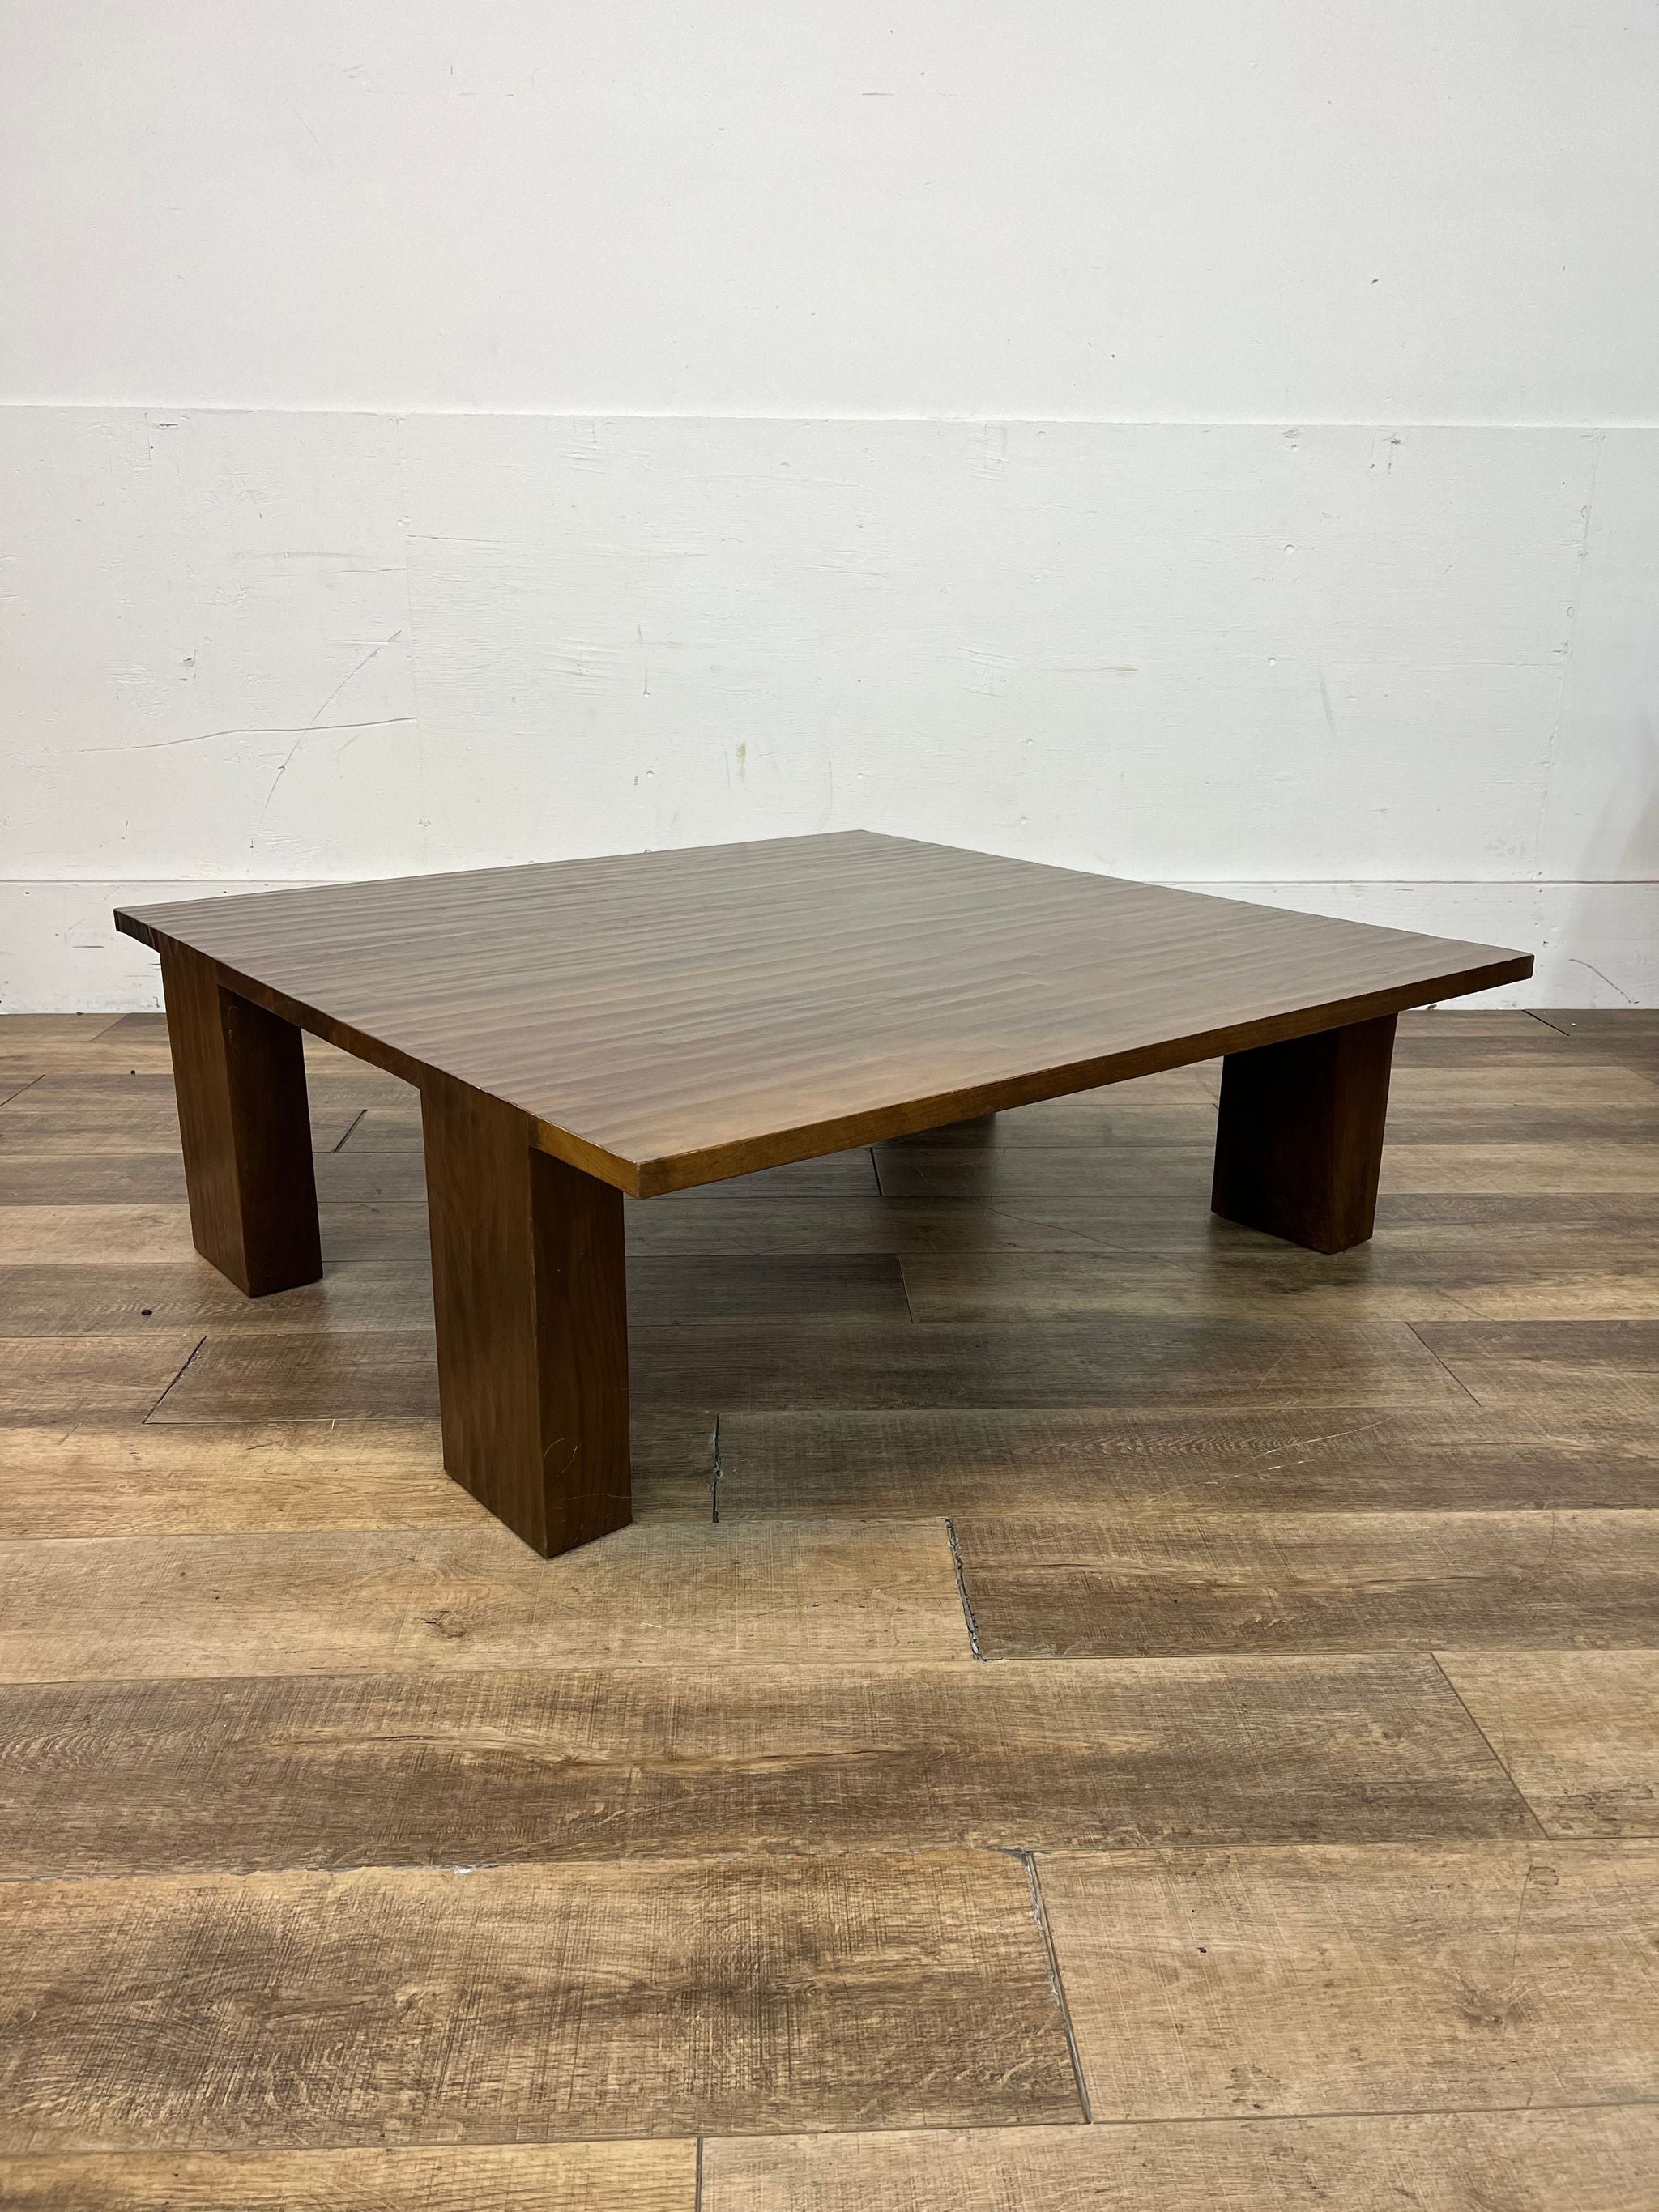 Custom-made walnut coffee table from Kendall Wilkinson Design, viewed at an angle.